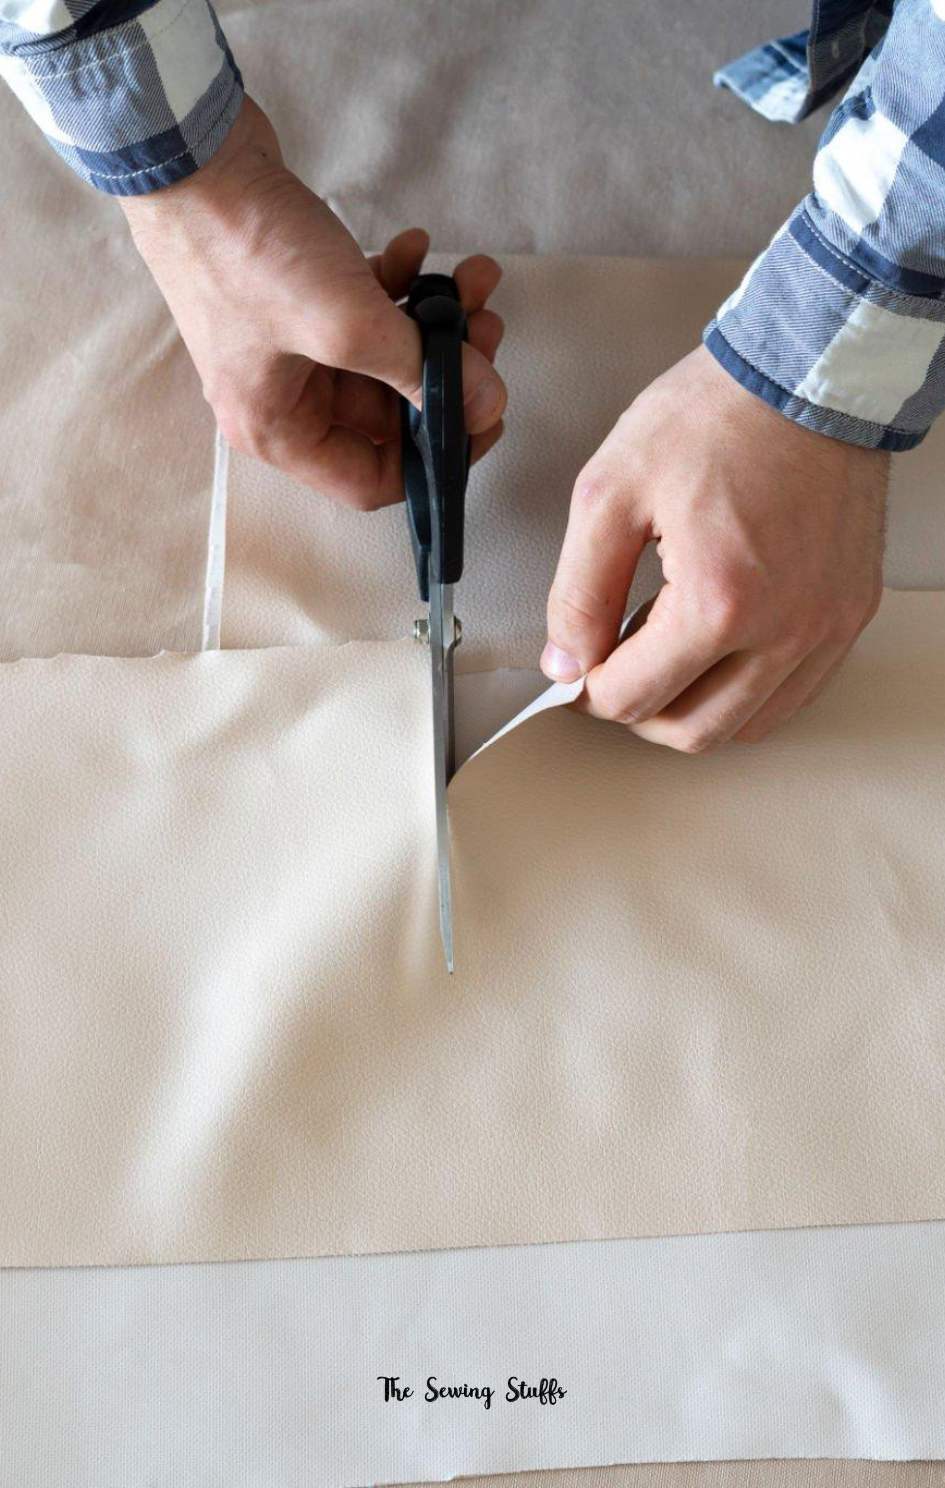 cut fabric in a straight line with scissors